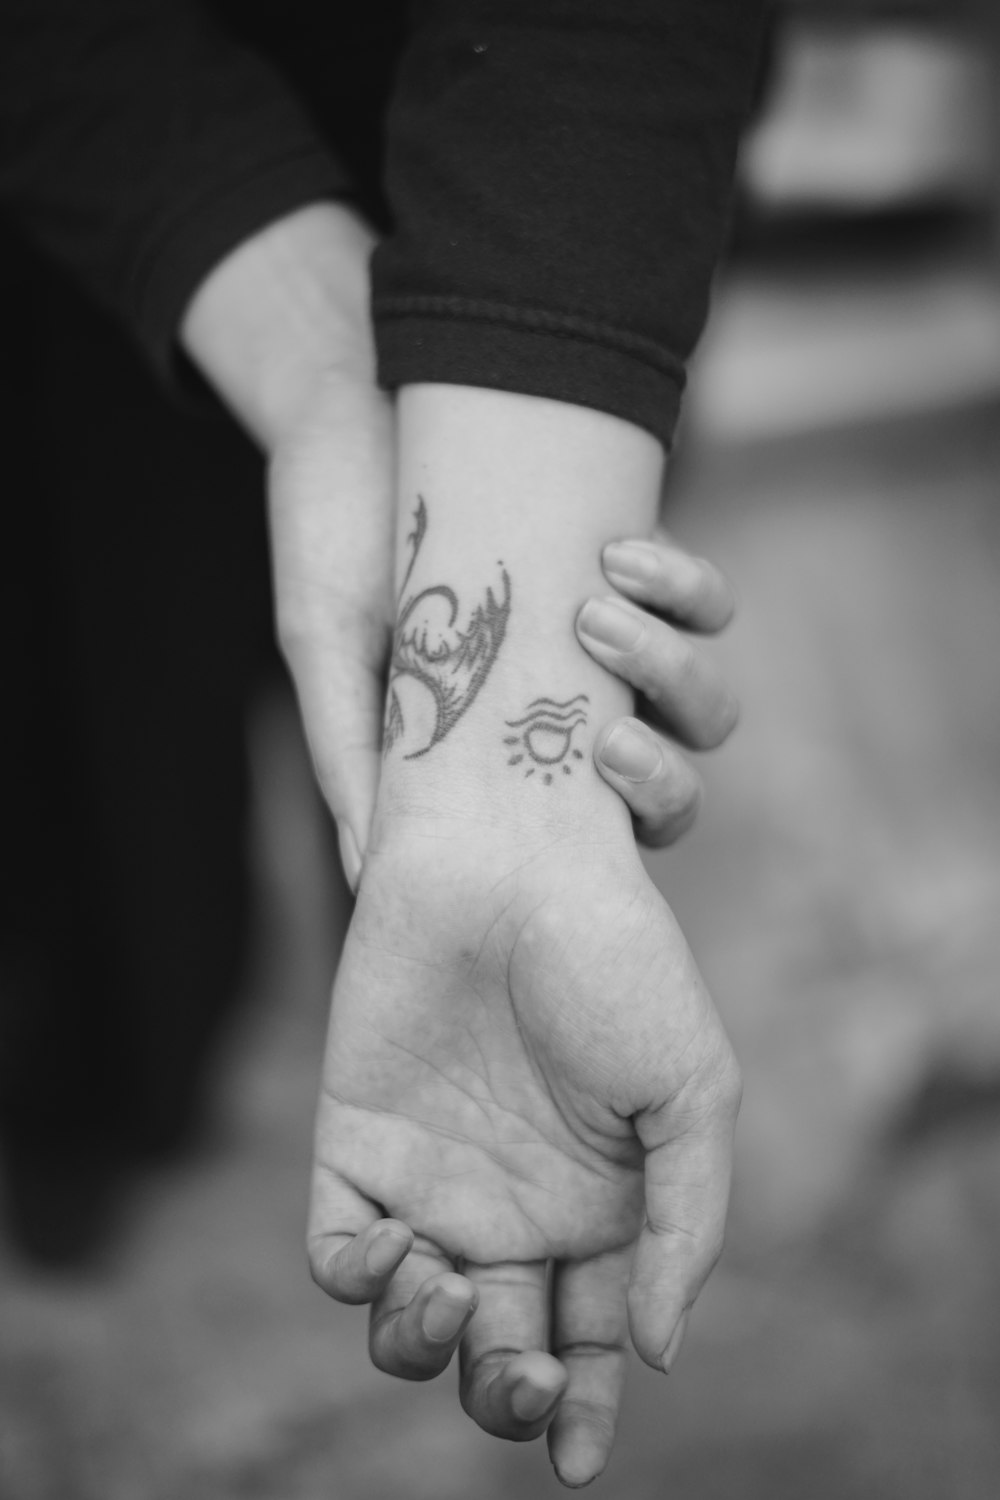 grayscale photo of human hand with tattoo